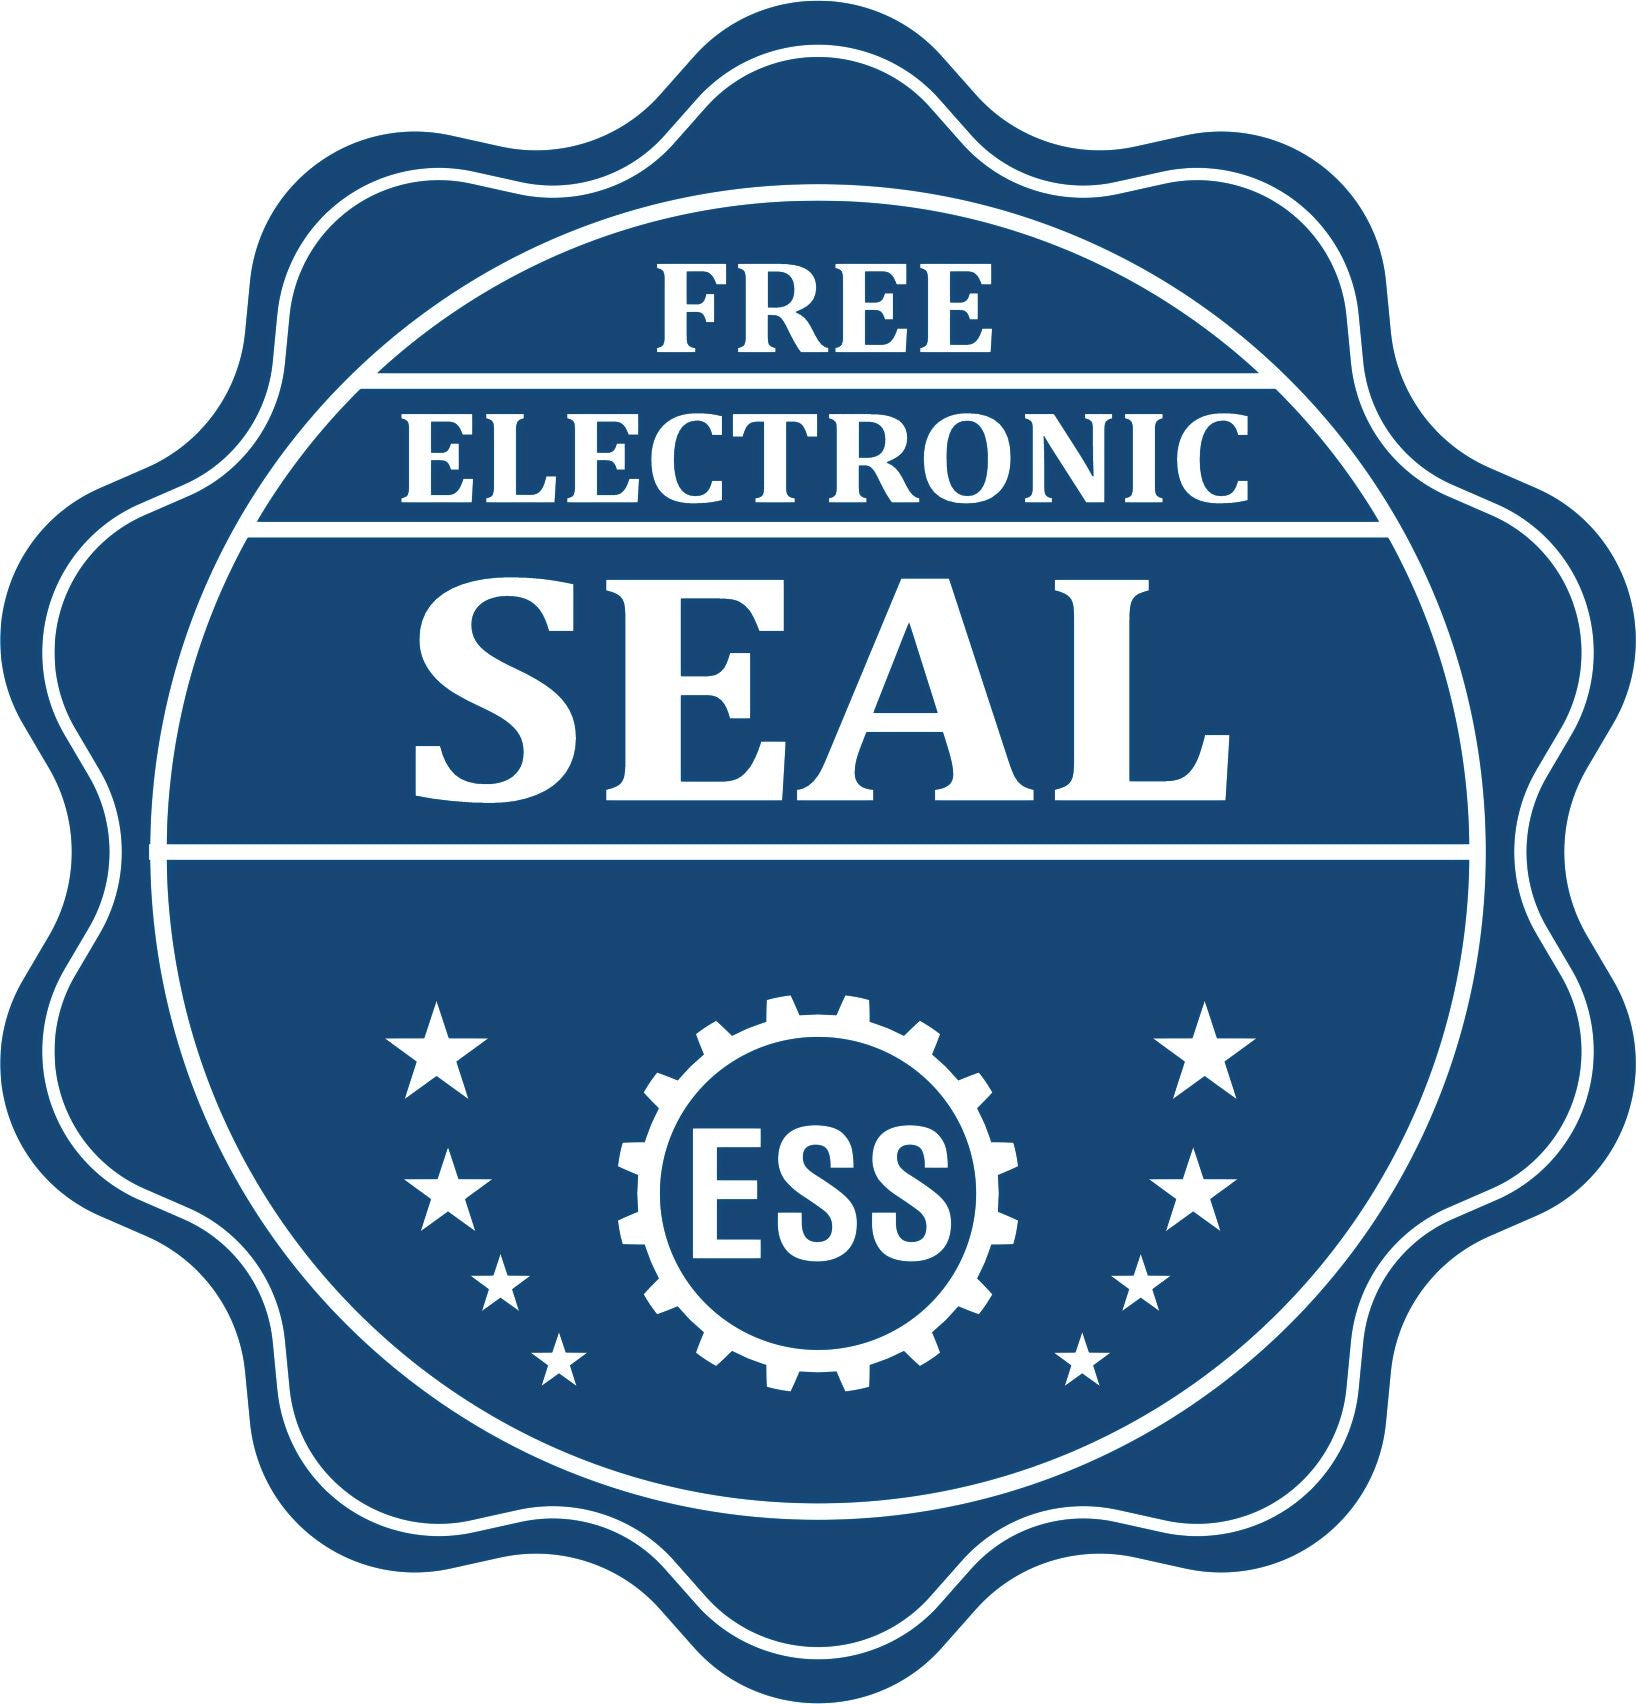 A badge showing a free electronic seal for the Kentucky Geologist Desk Seal with stars and the ESS gear on the emblem.